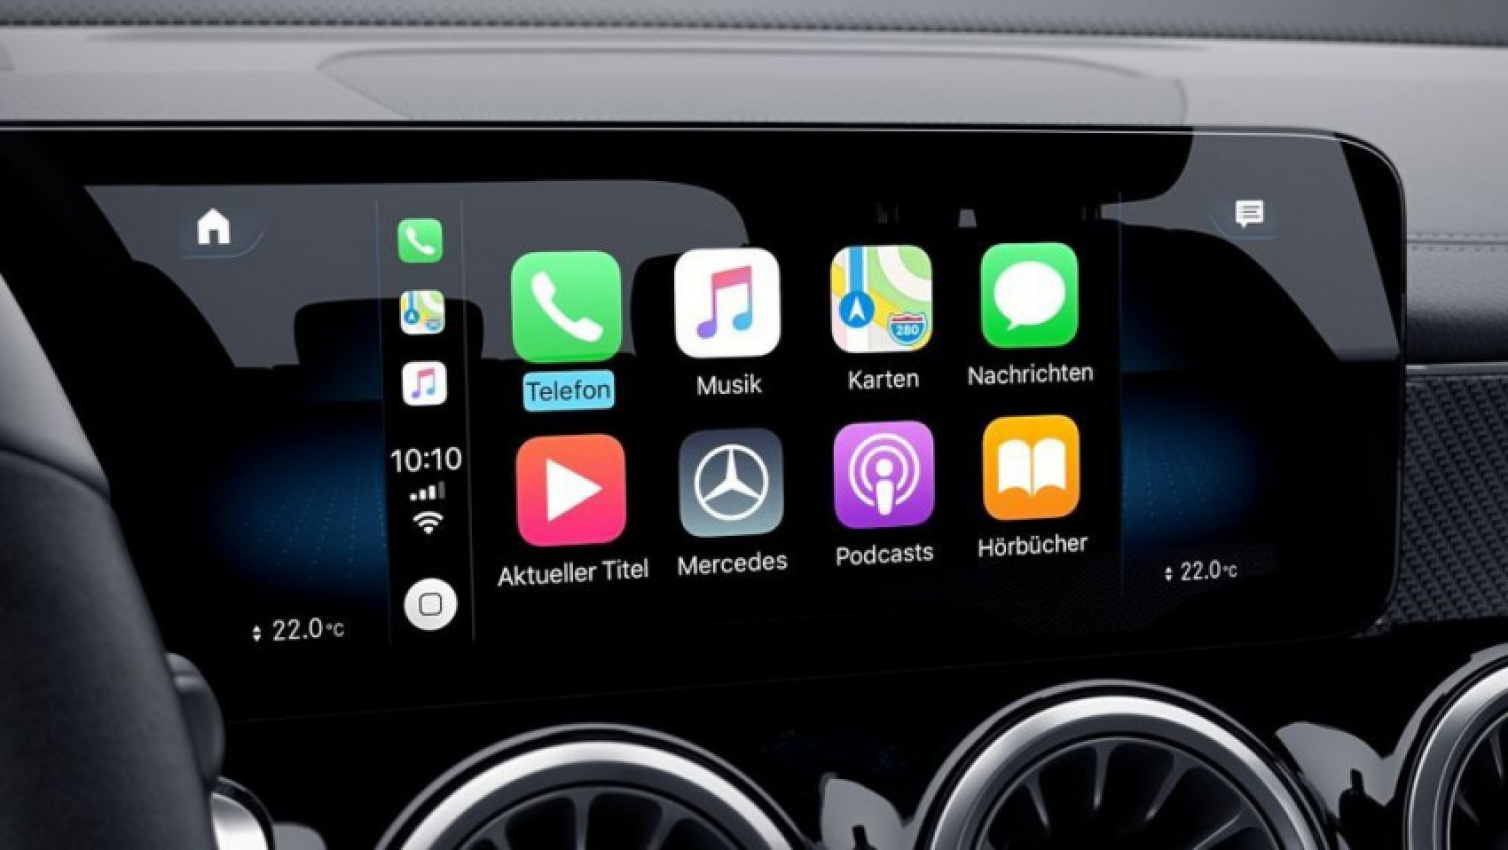 autos, cars, google, aco tech, android, android auto, apple carplay, auto news, gkui, infotainment, over the air, proton, software, spotify, update, android, spotify app coming to proton gkui? carplay/android auto unlikely